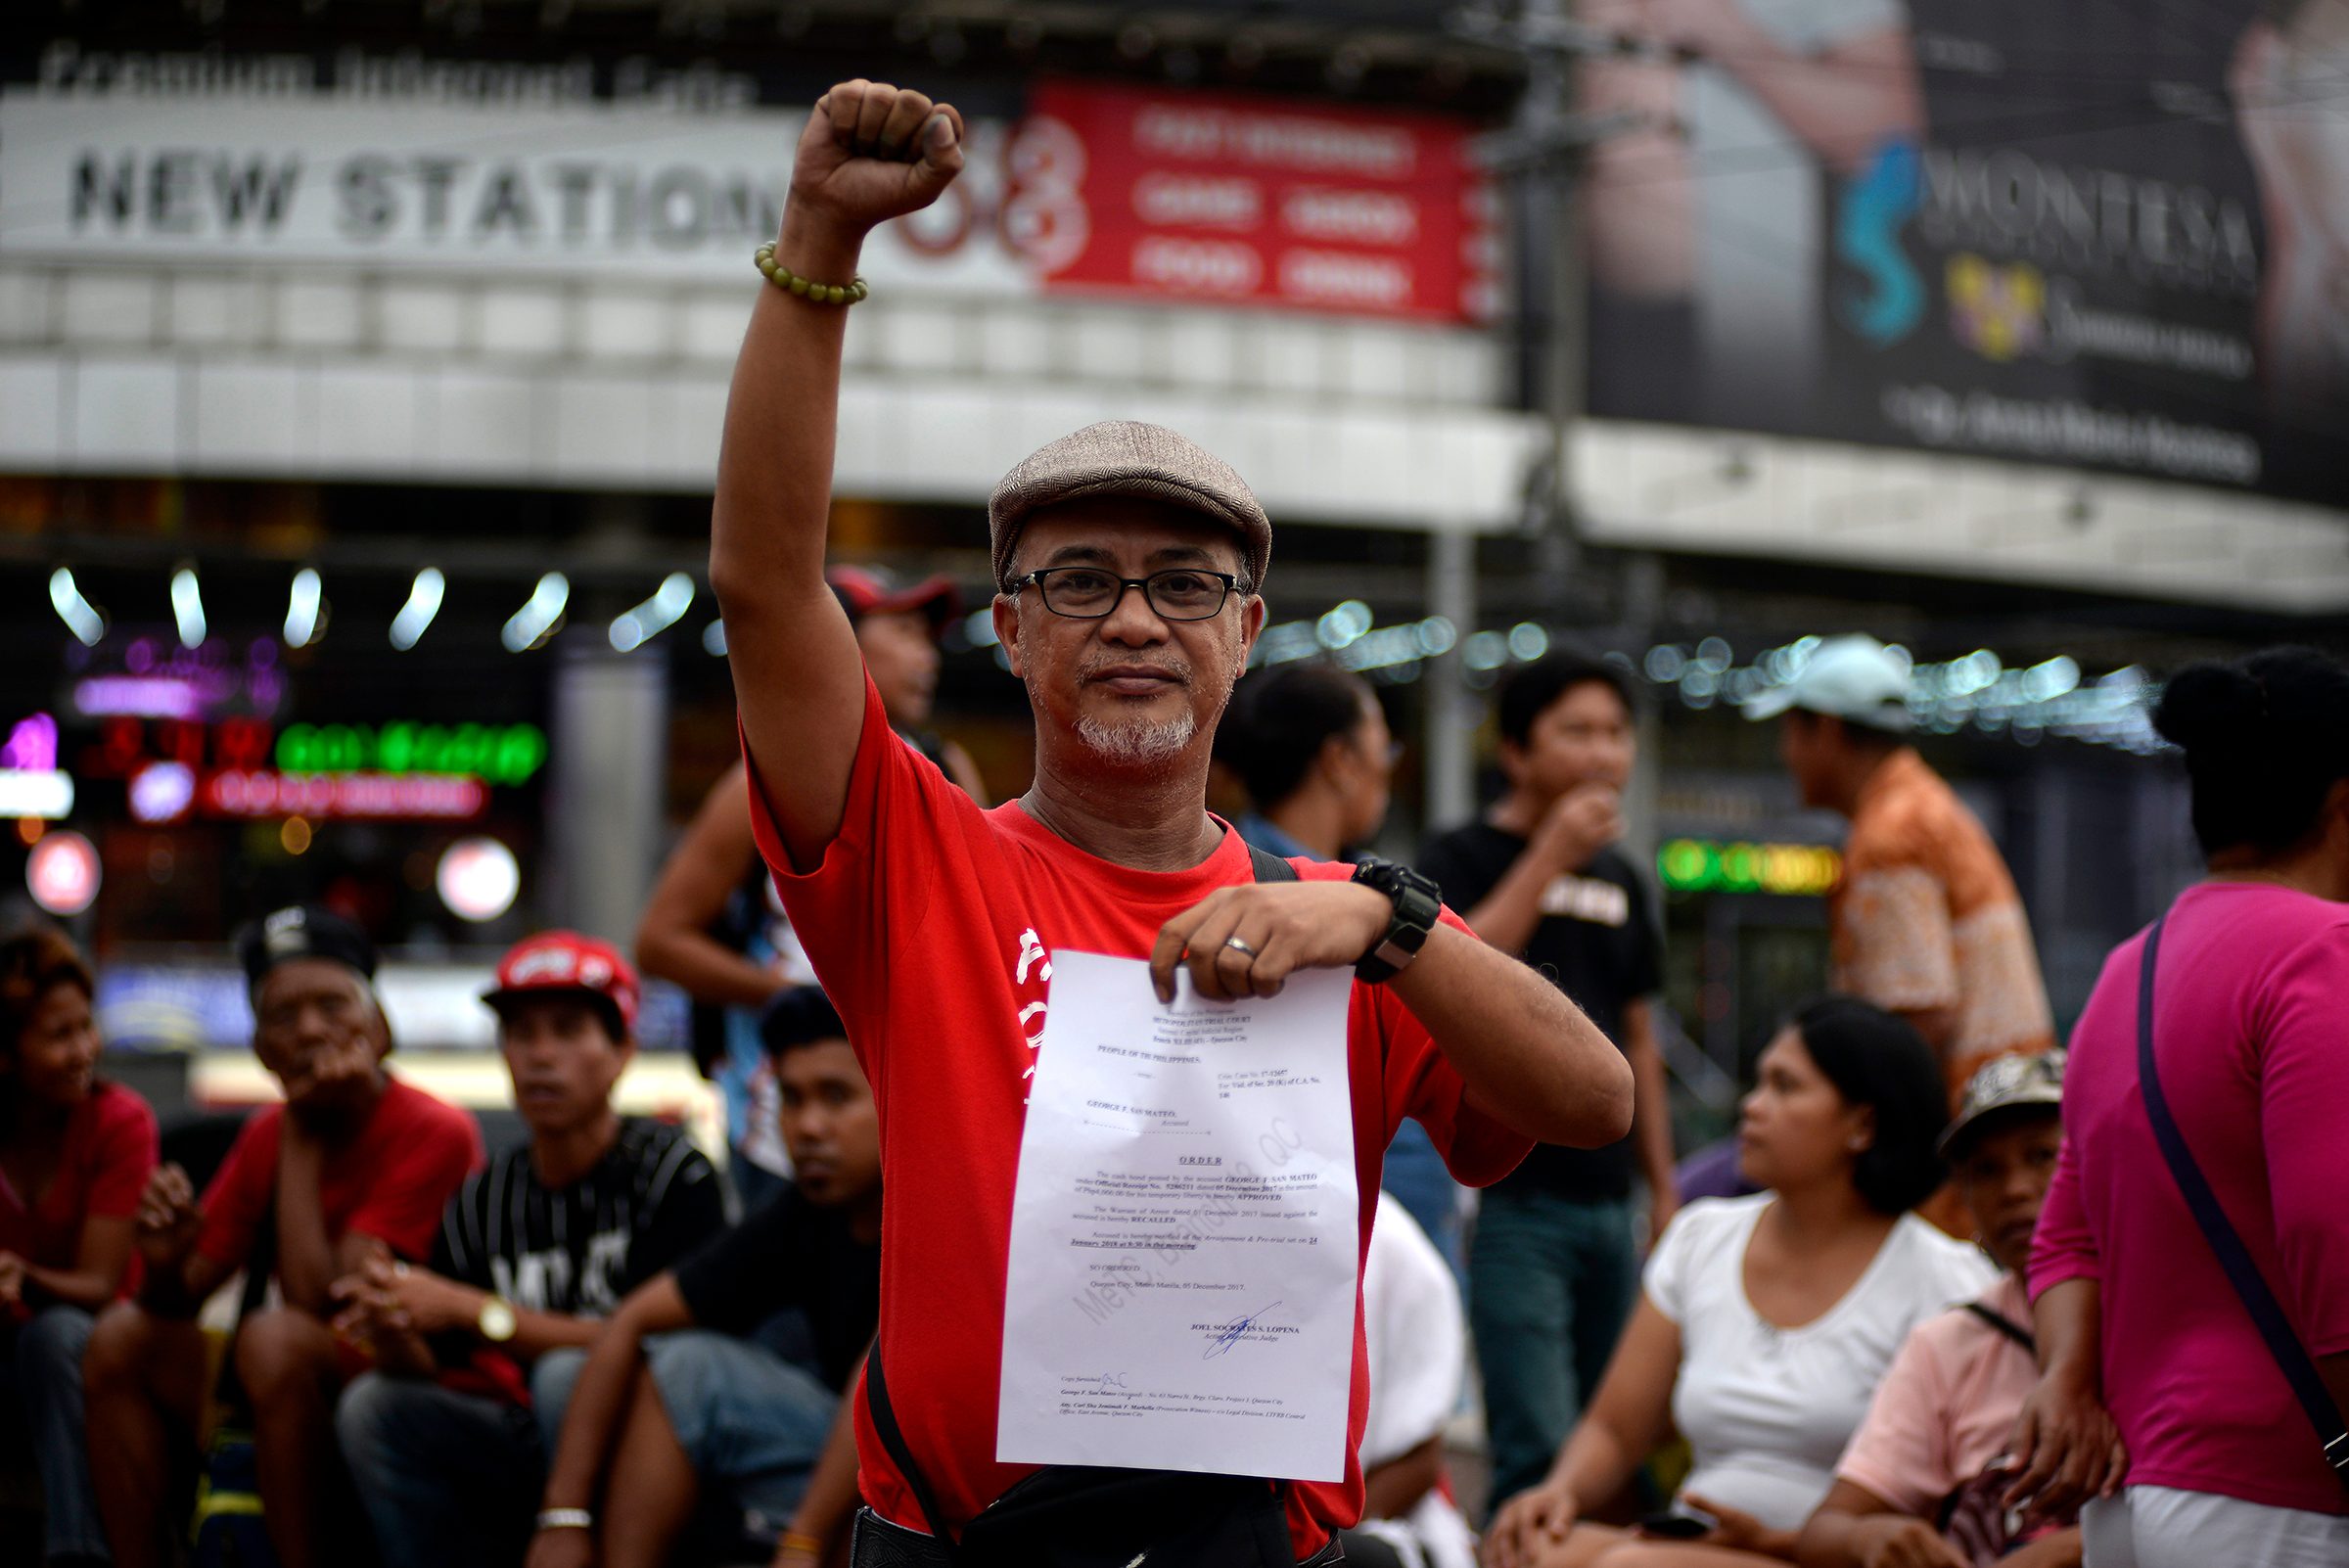 IN PHOTOS: Groups protest arrest of Piston’s George San Mateo